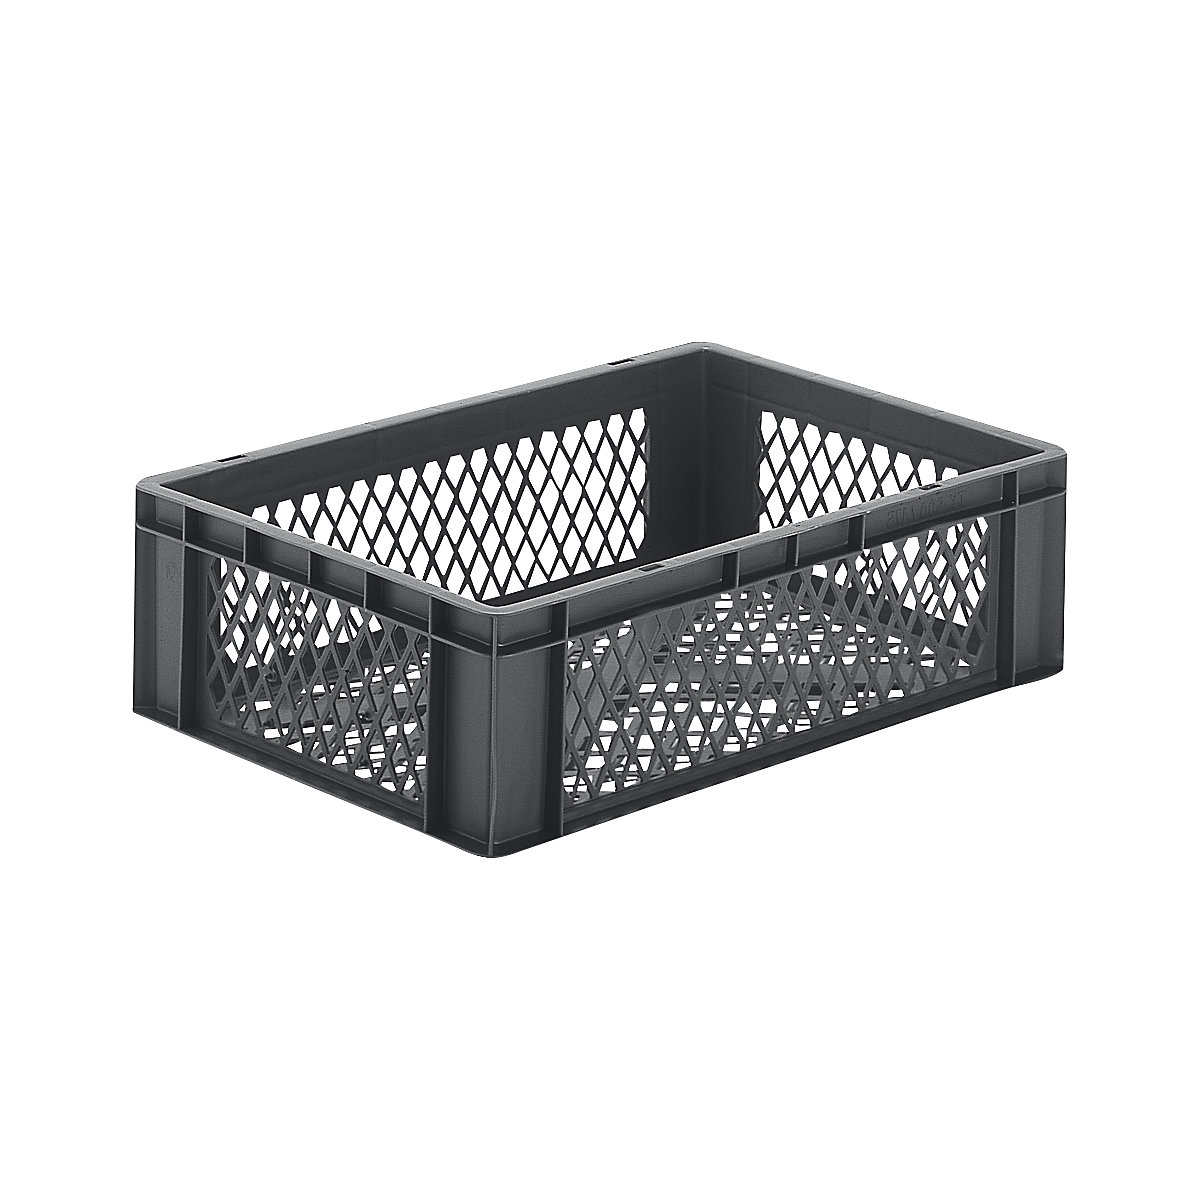 Euro stacking container, perforated walls and base, LxWxH 600 x 400 x 175 mm, grey, pack of 5-6